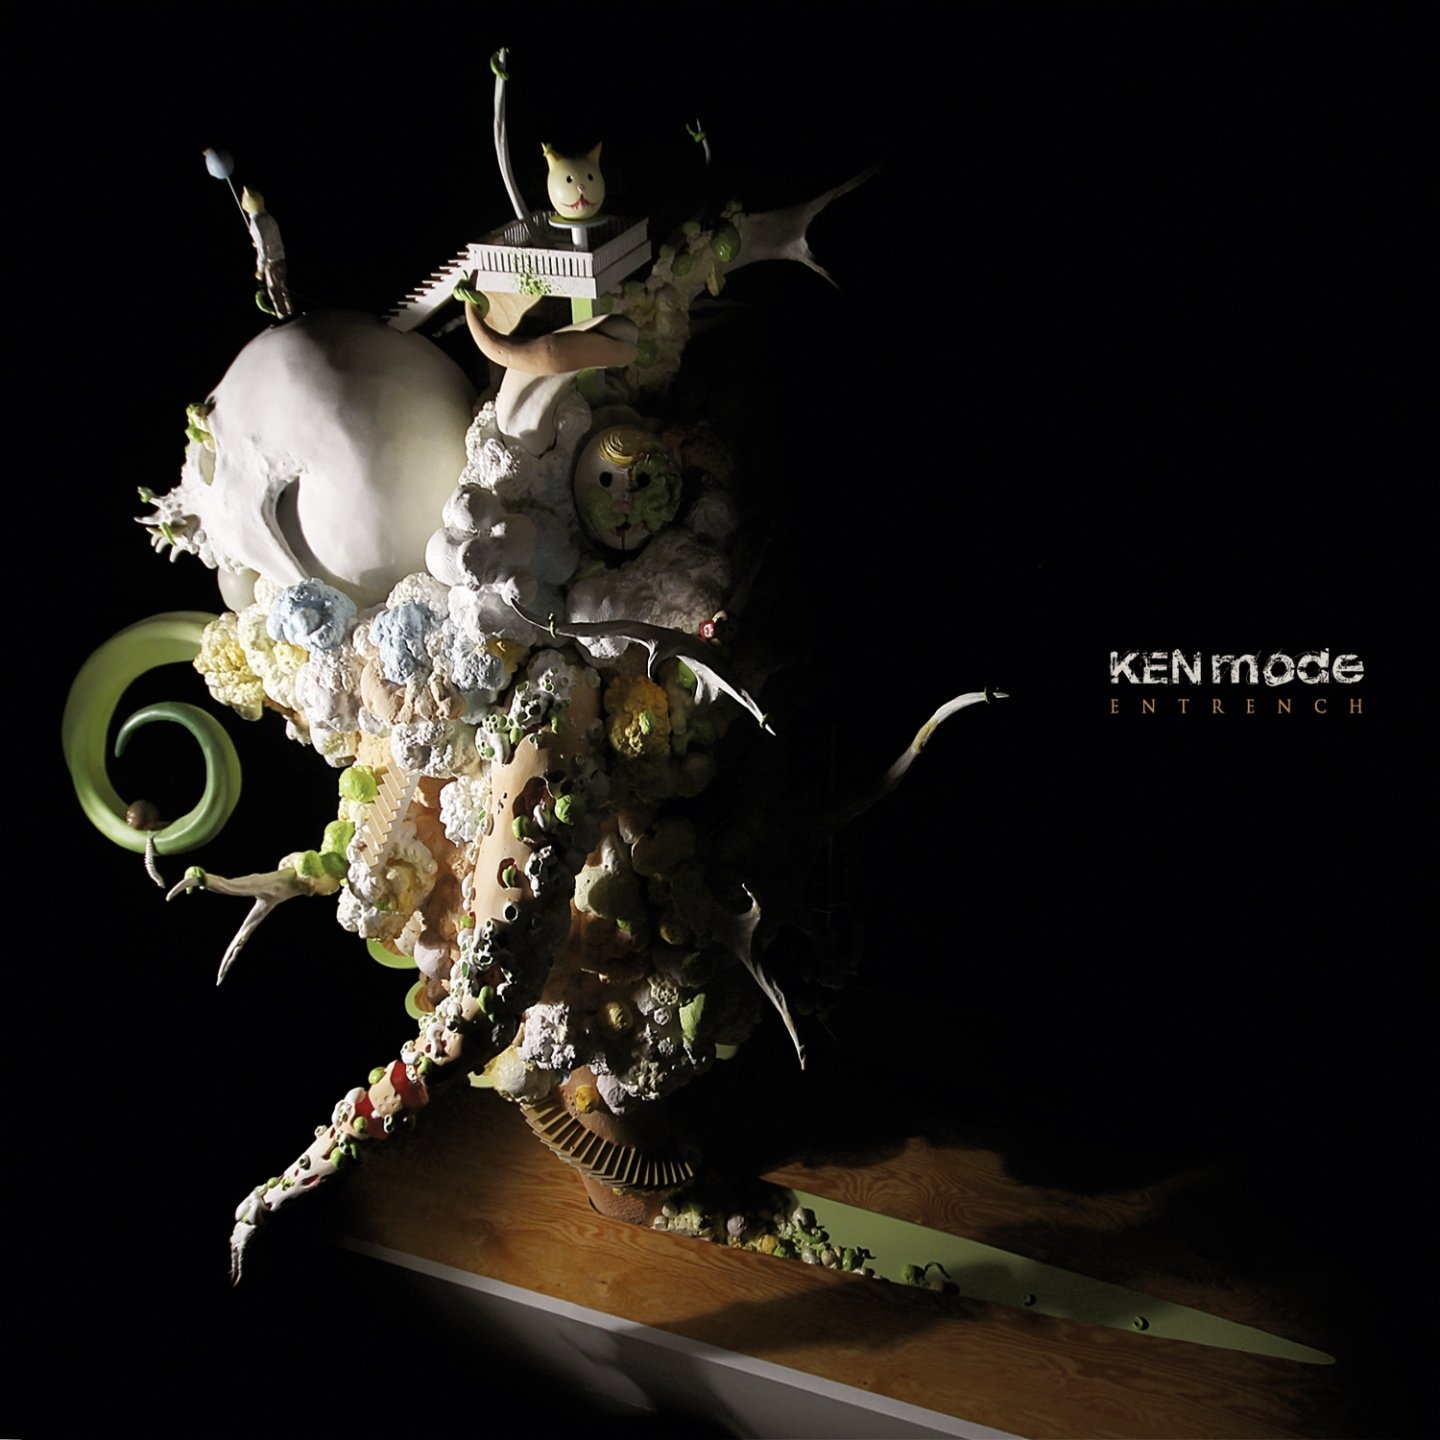 KEN Mode - Entrench (2013) FLAC Download